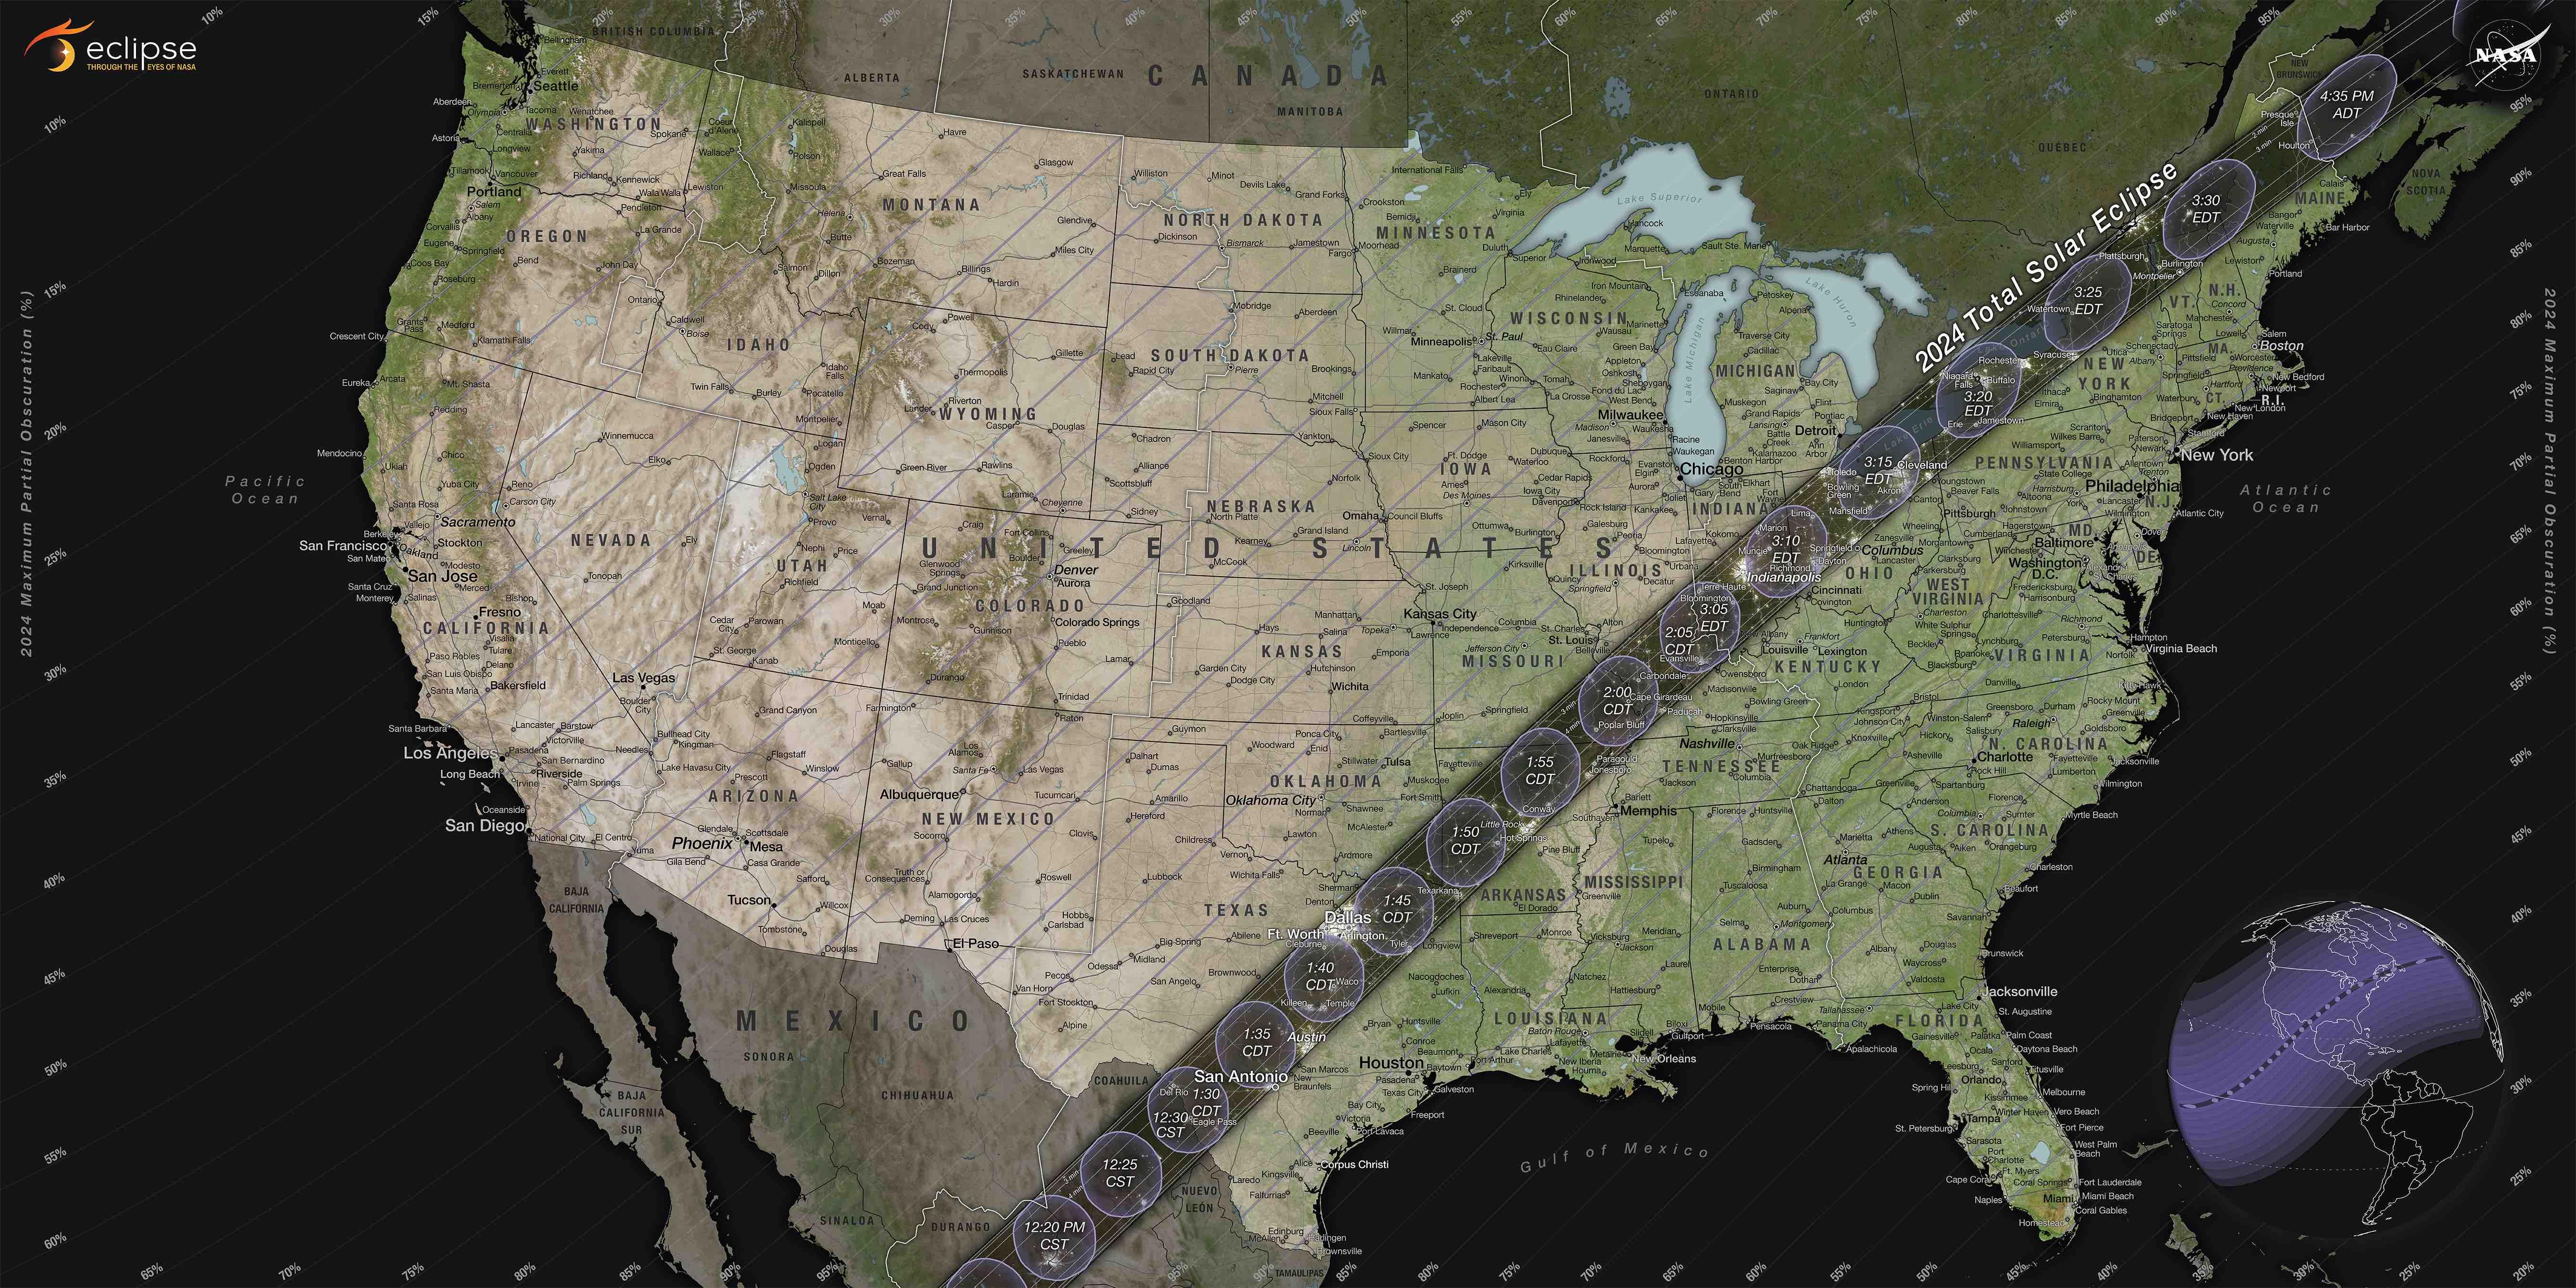 A map of the path of totality for the April 8 solar eclipse. (NASA's Scientific Visualization Studio)